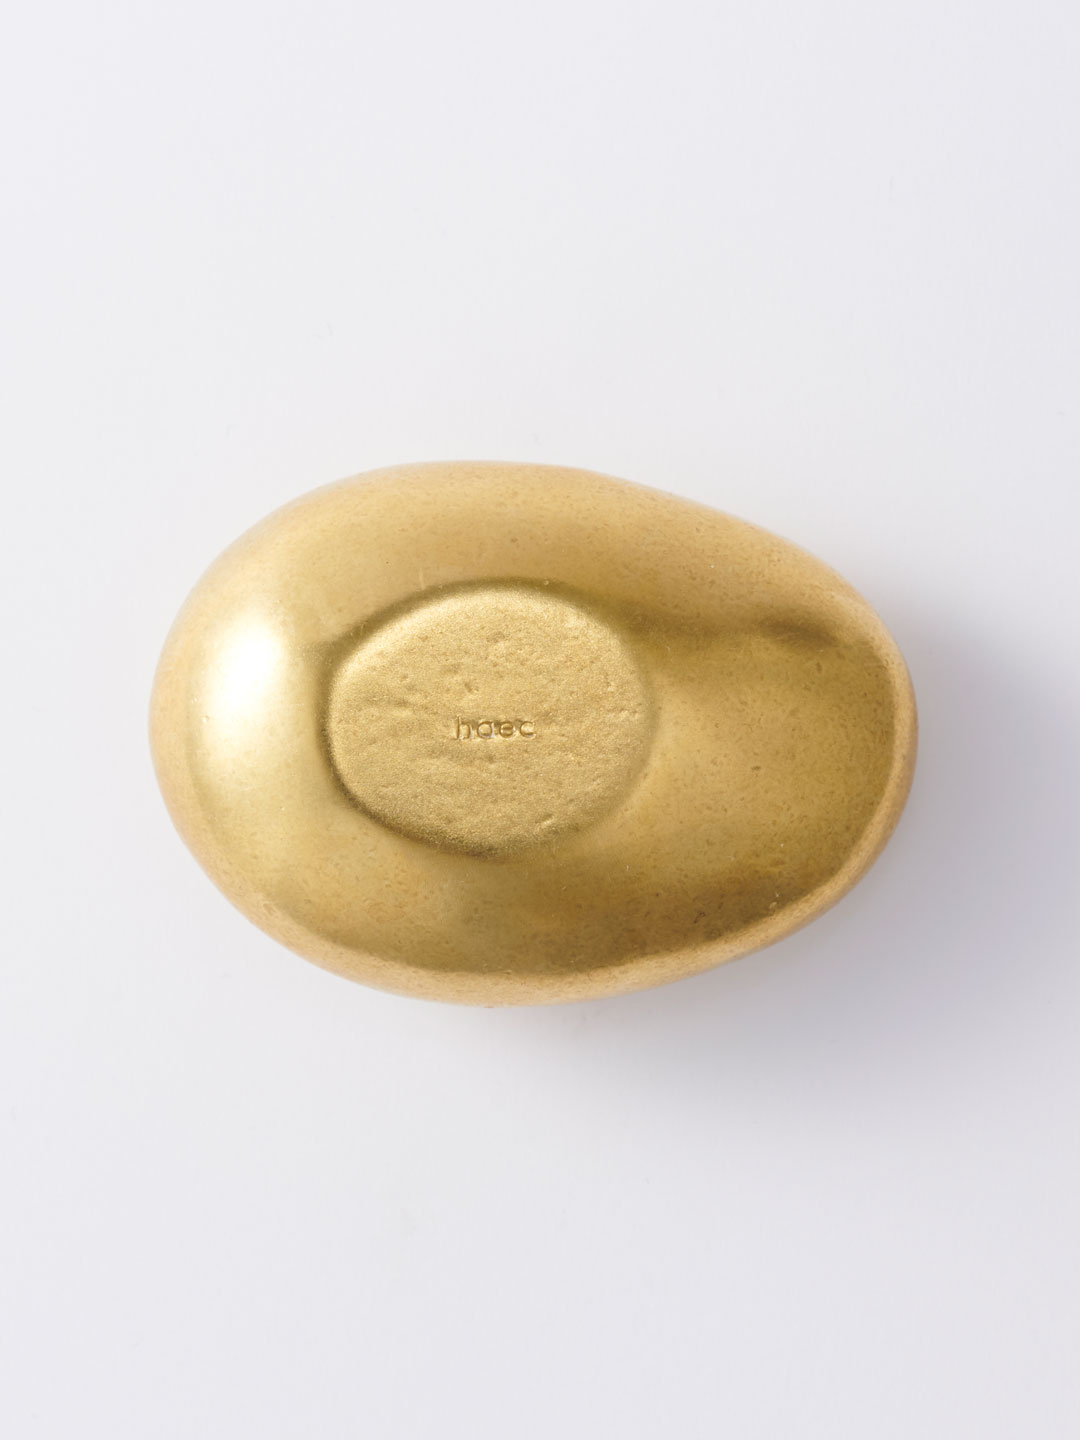 Paper Weight 003 - Gold